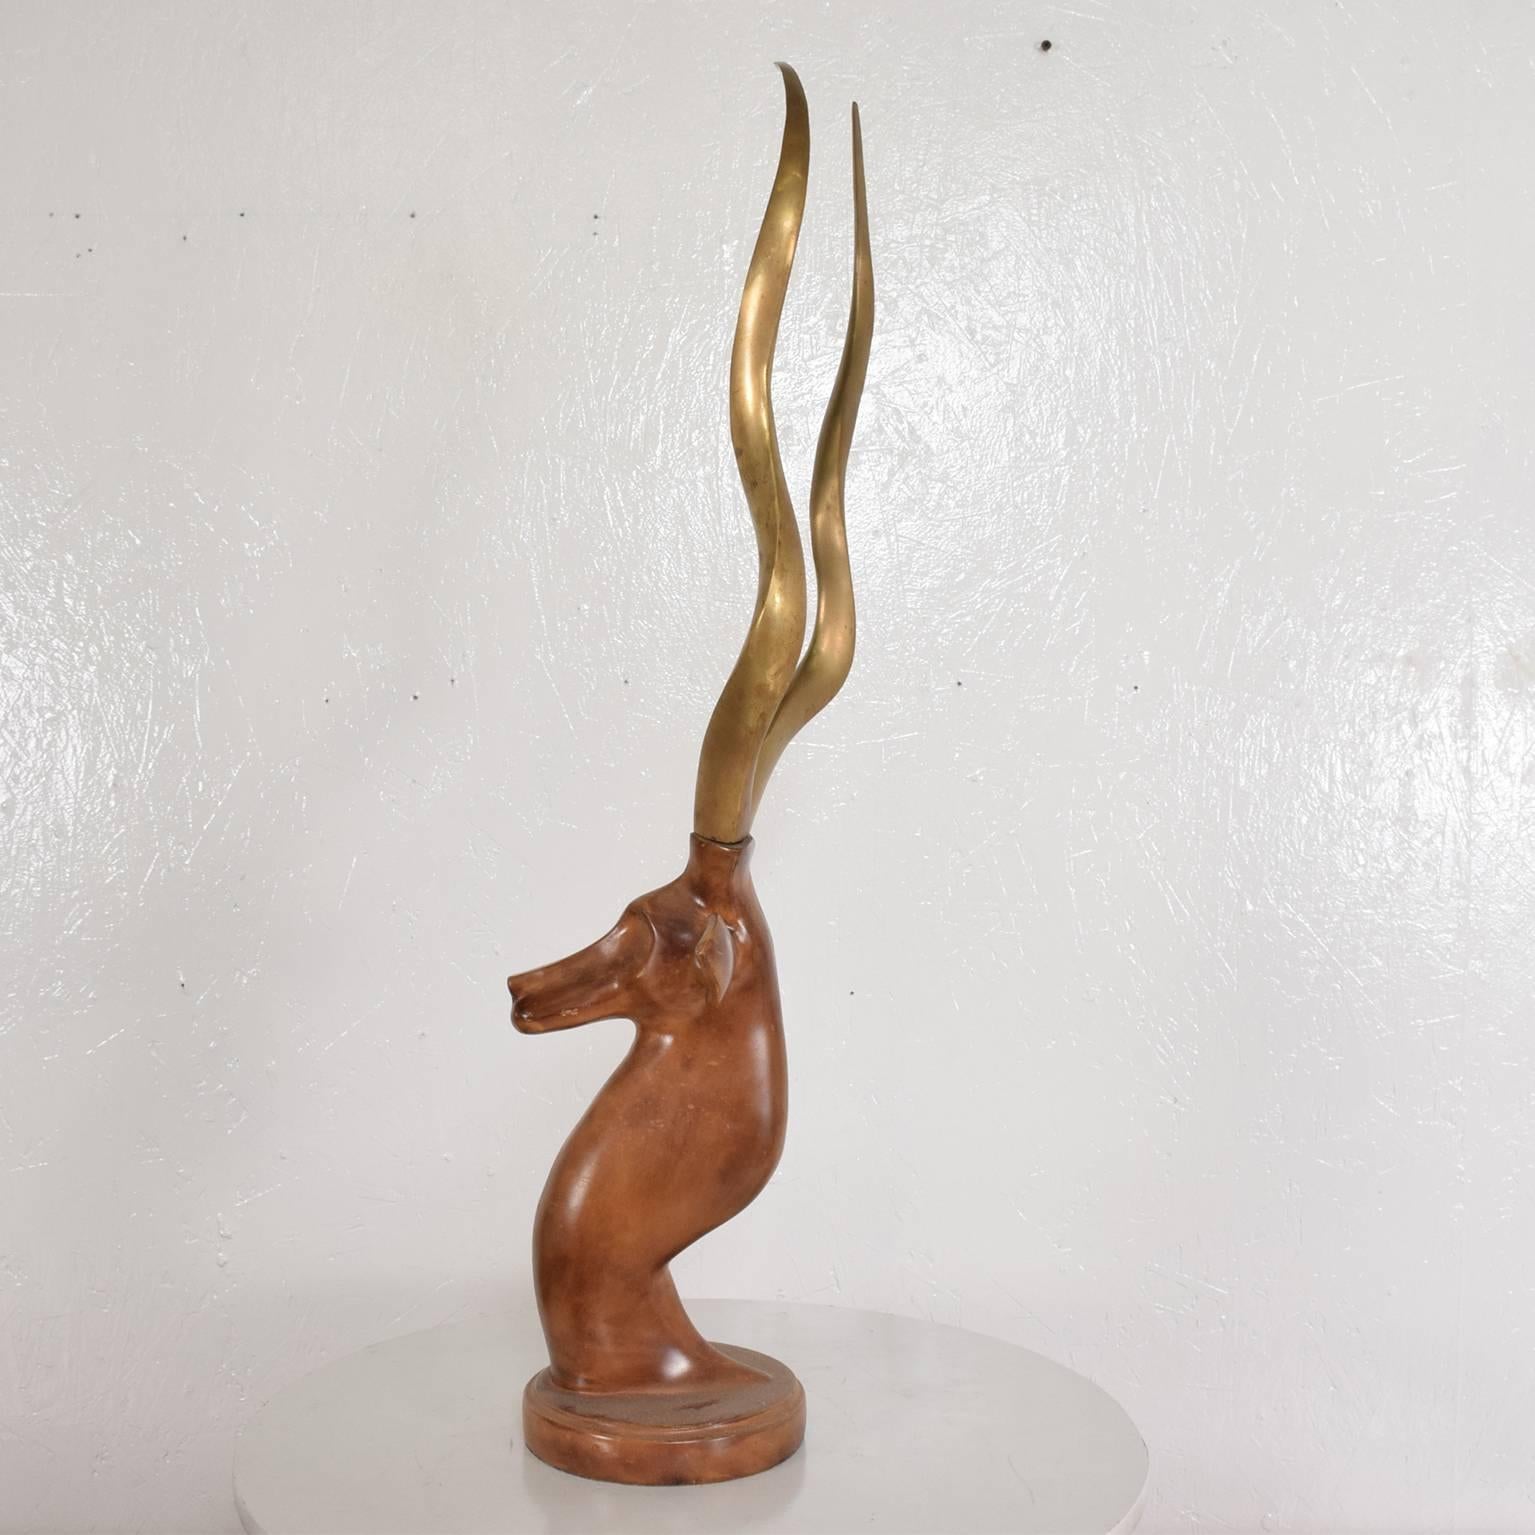 For your consideration a beautiful metal gazelle with brass antlers,
circa 1980s.
Measure: 28'in H x 7.4